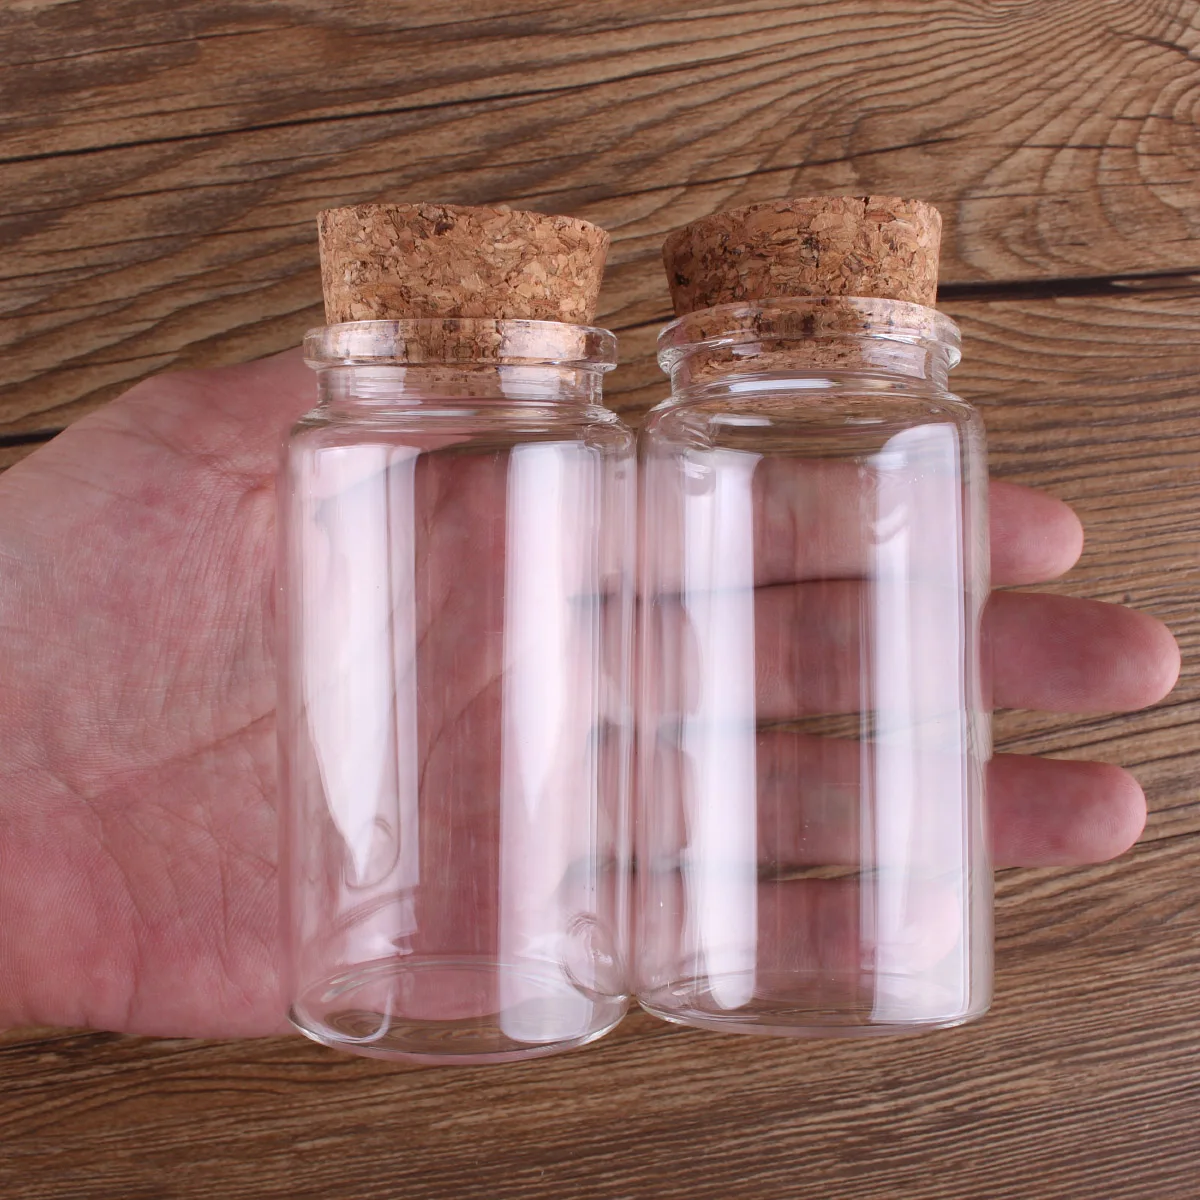 2pcs 120ml 47*90mm Glass Candy Bottles with Cork Lids Spice Jars Wishing bottles Storage Bottles Pill Container DIY Crafts